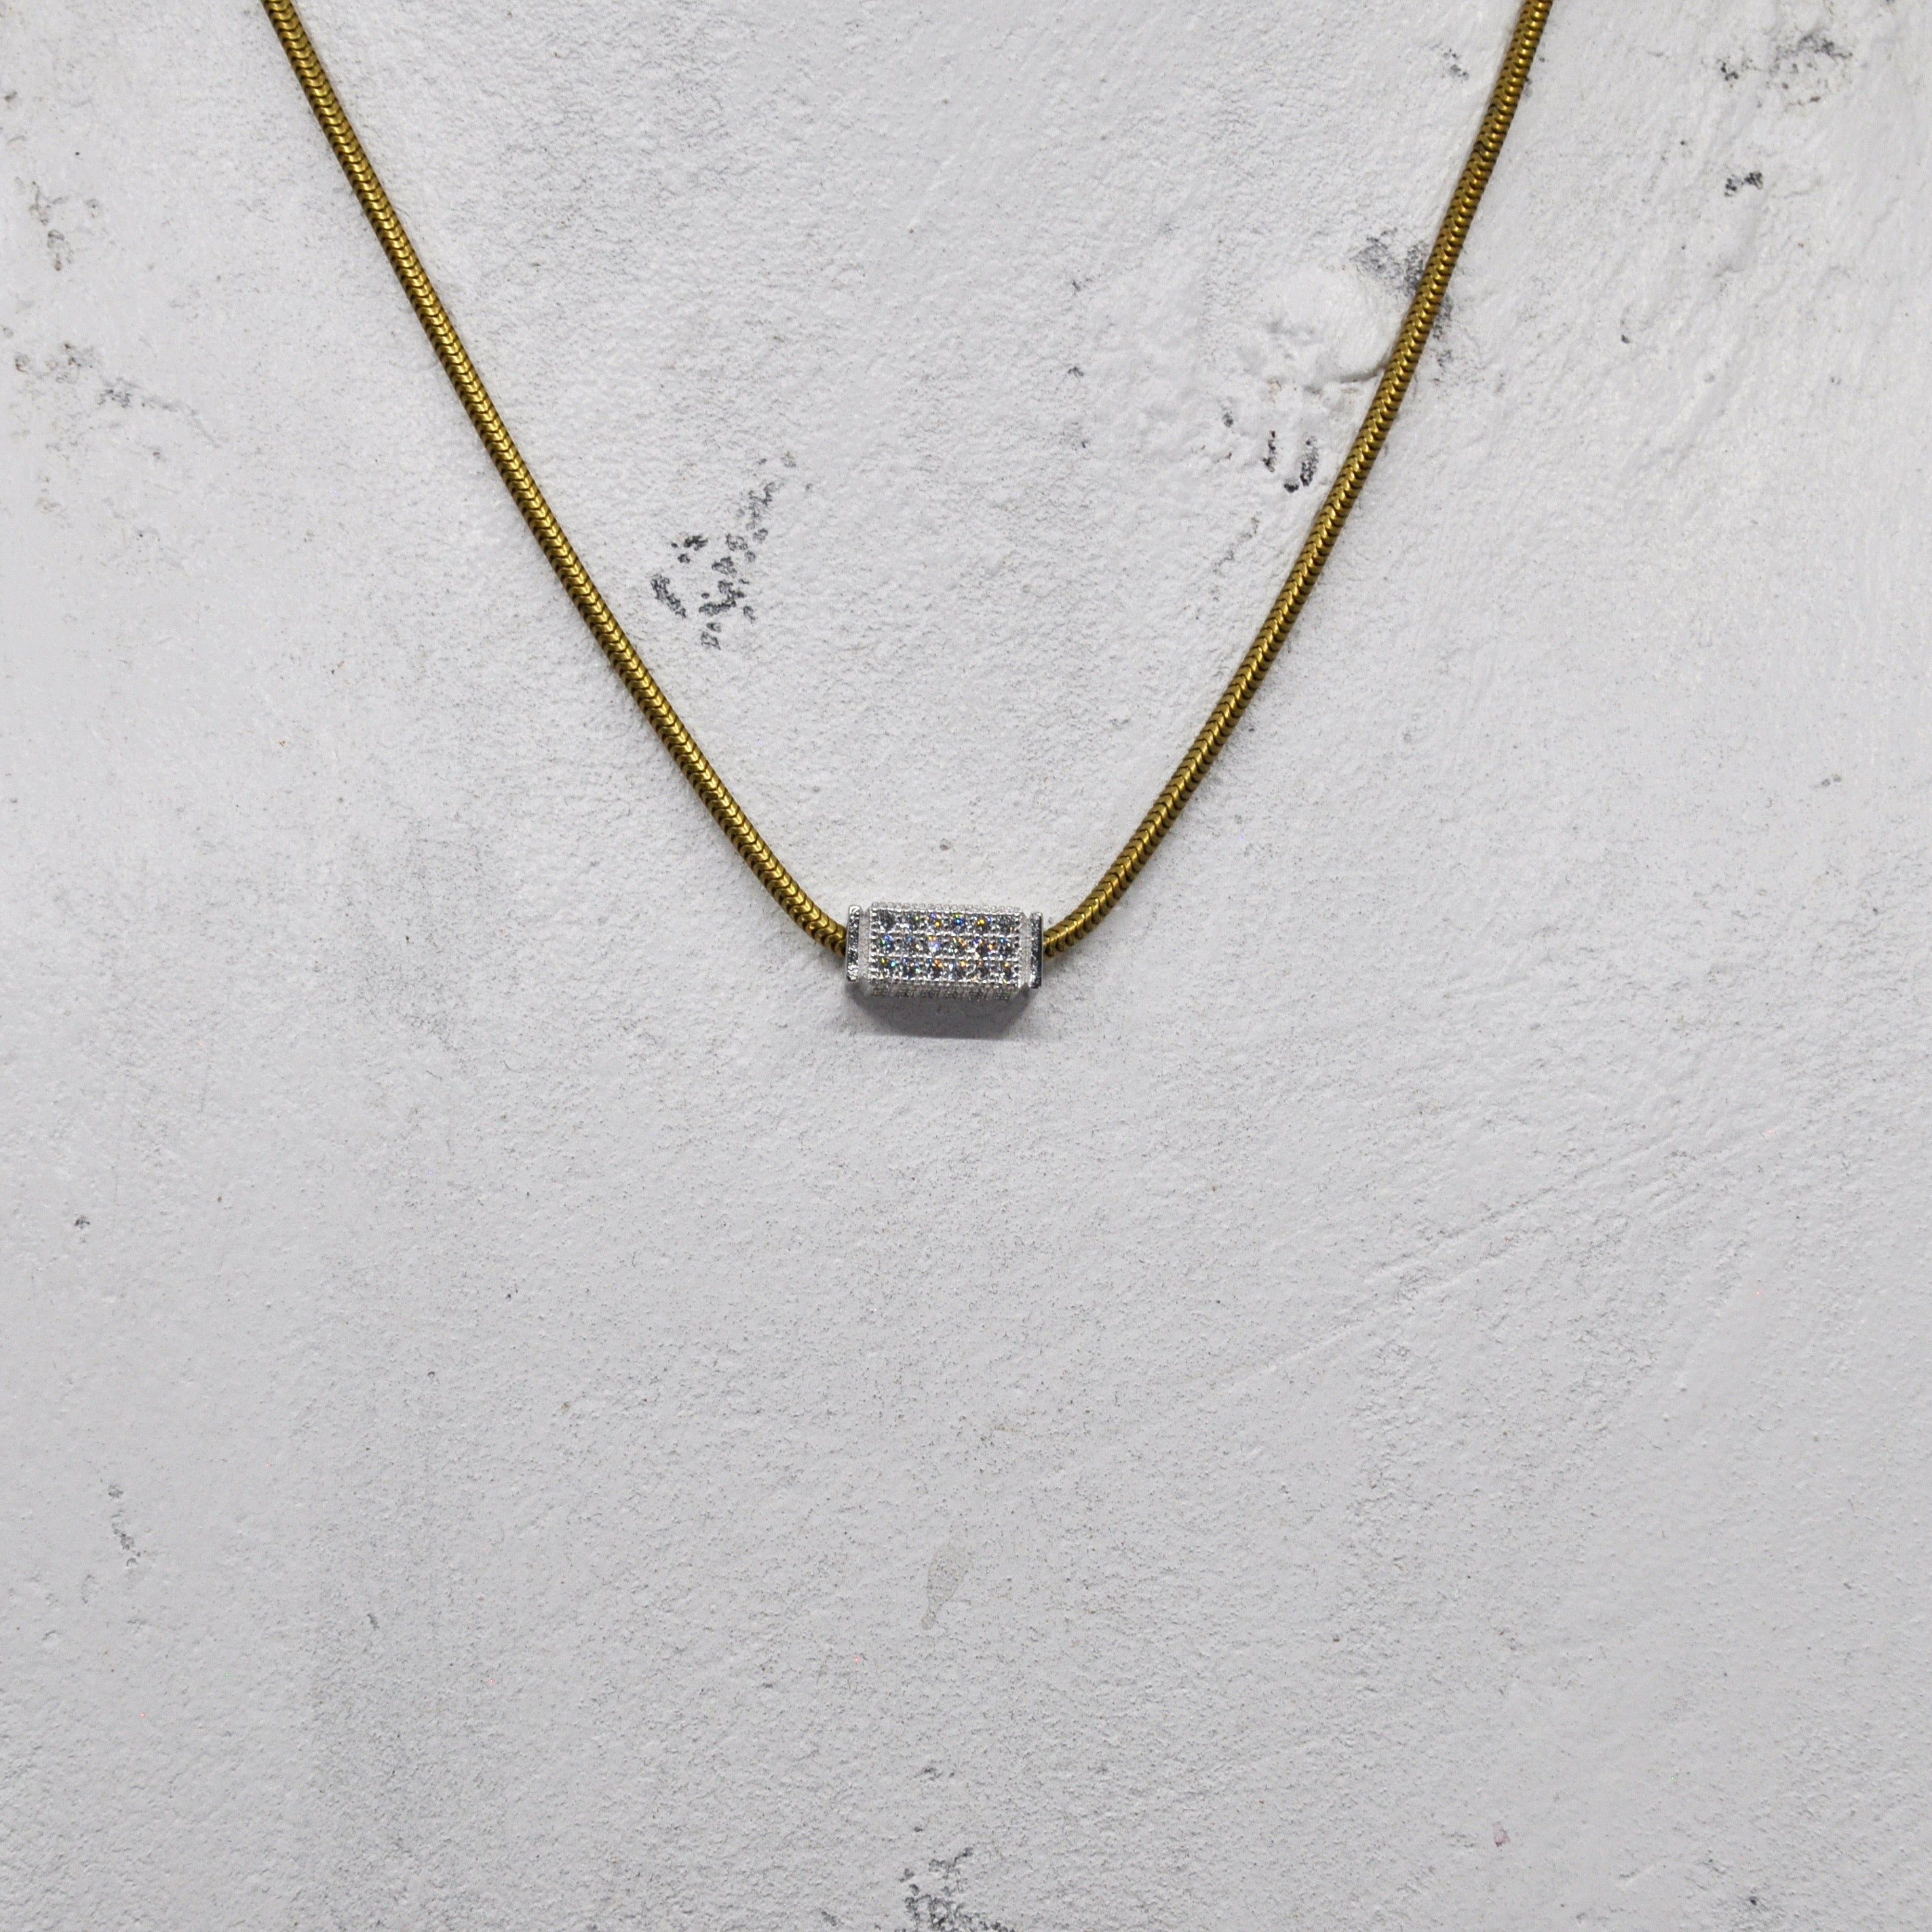 Vintage Snake Layering Chain with Pave Bead